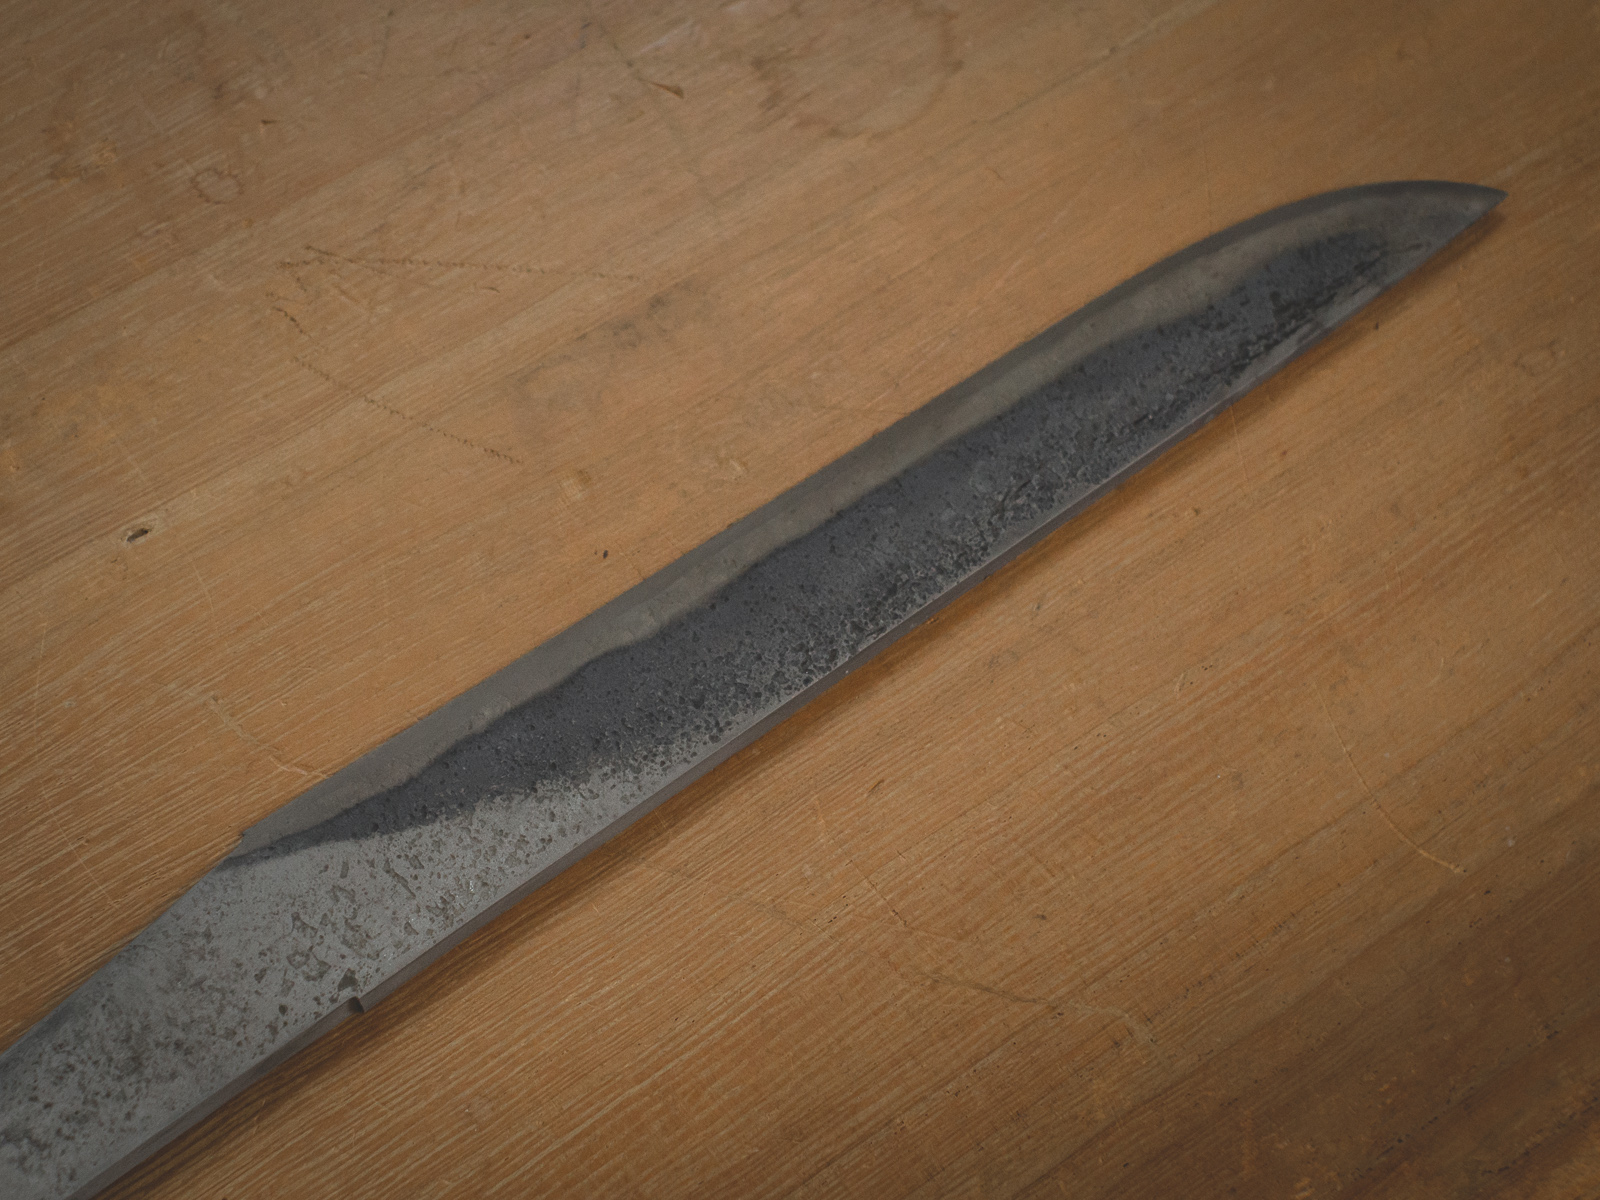 Island Blacksmith: Charcoal forged knives from antique steel.